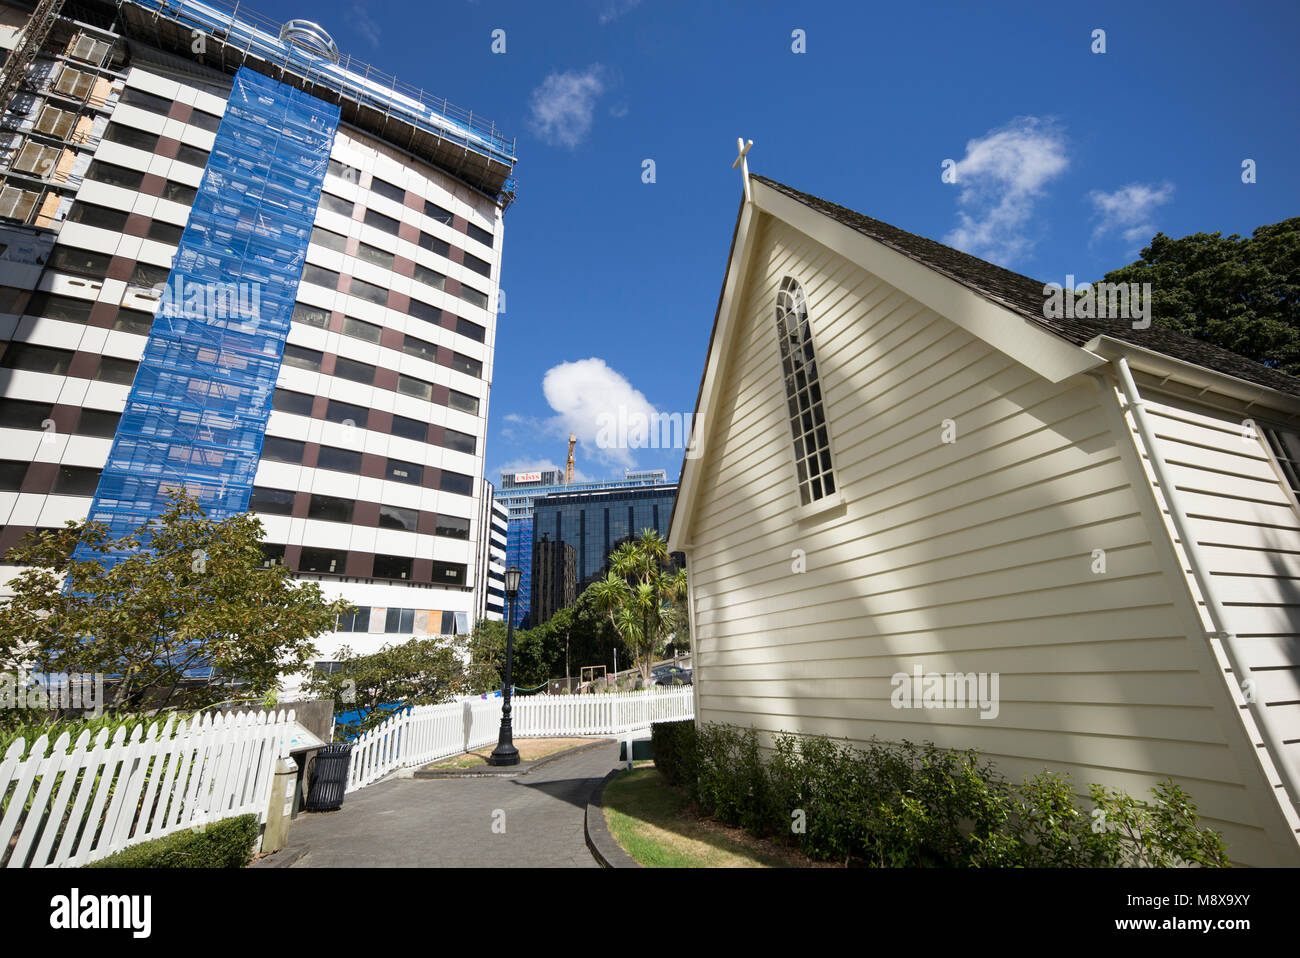 Contrasting image of two buildings in Wellington, New Zealand Stock Photo